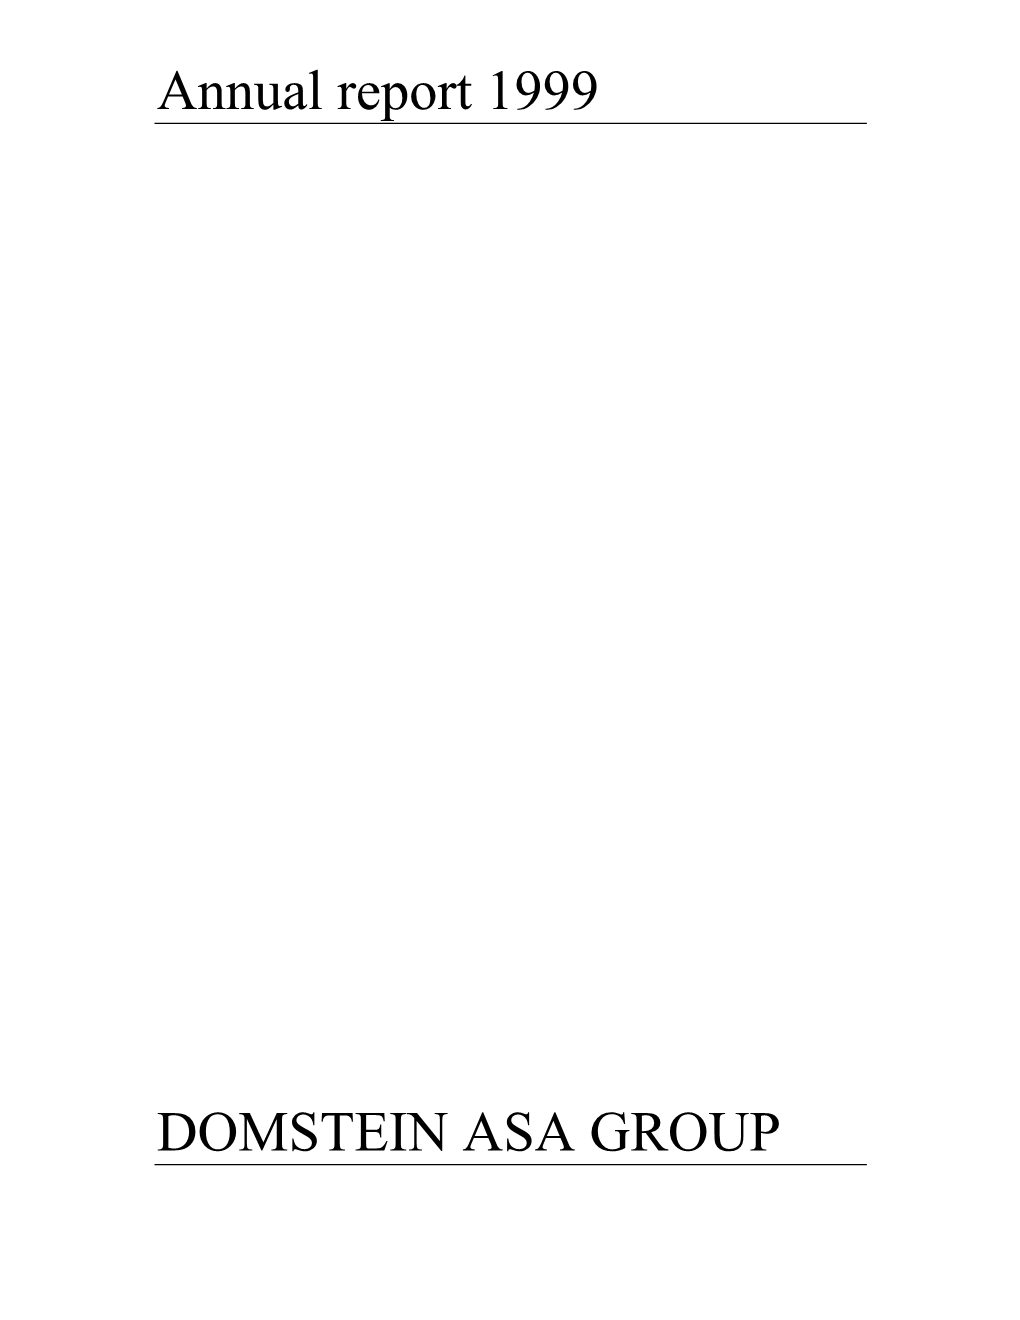 Annual Report 1999 DOMSTEIN ASA GROUP